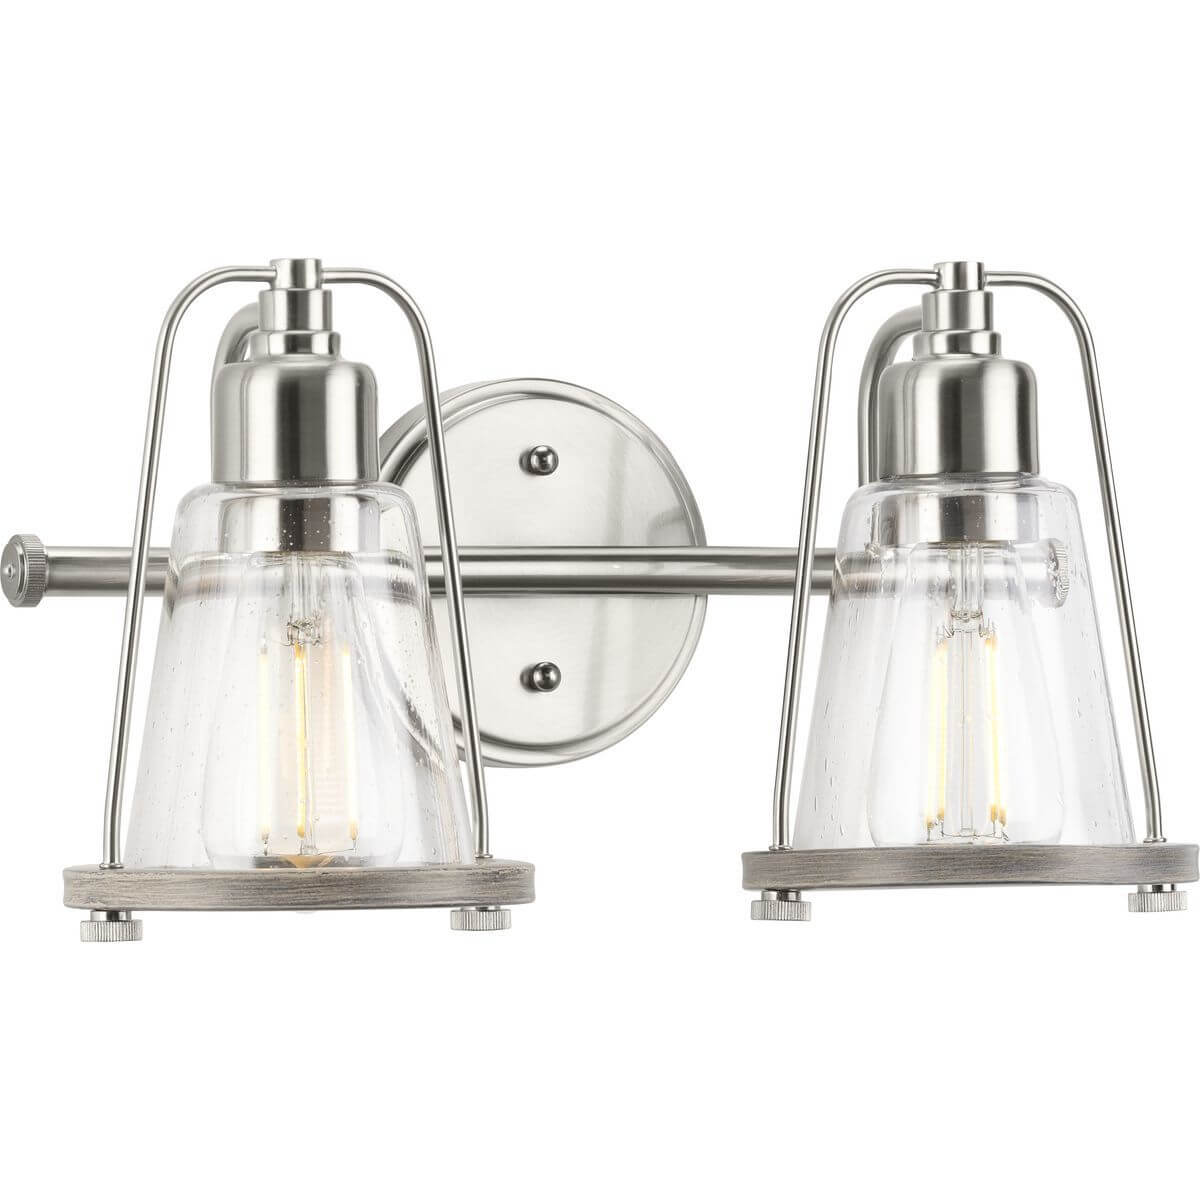 Progress Lighting P300296-009 Conway 2 Light 15 inch Bath Vanity Light in Brushed Nickel with Clear Seeded Glass